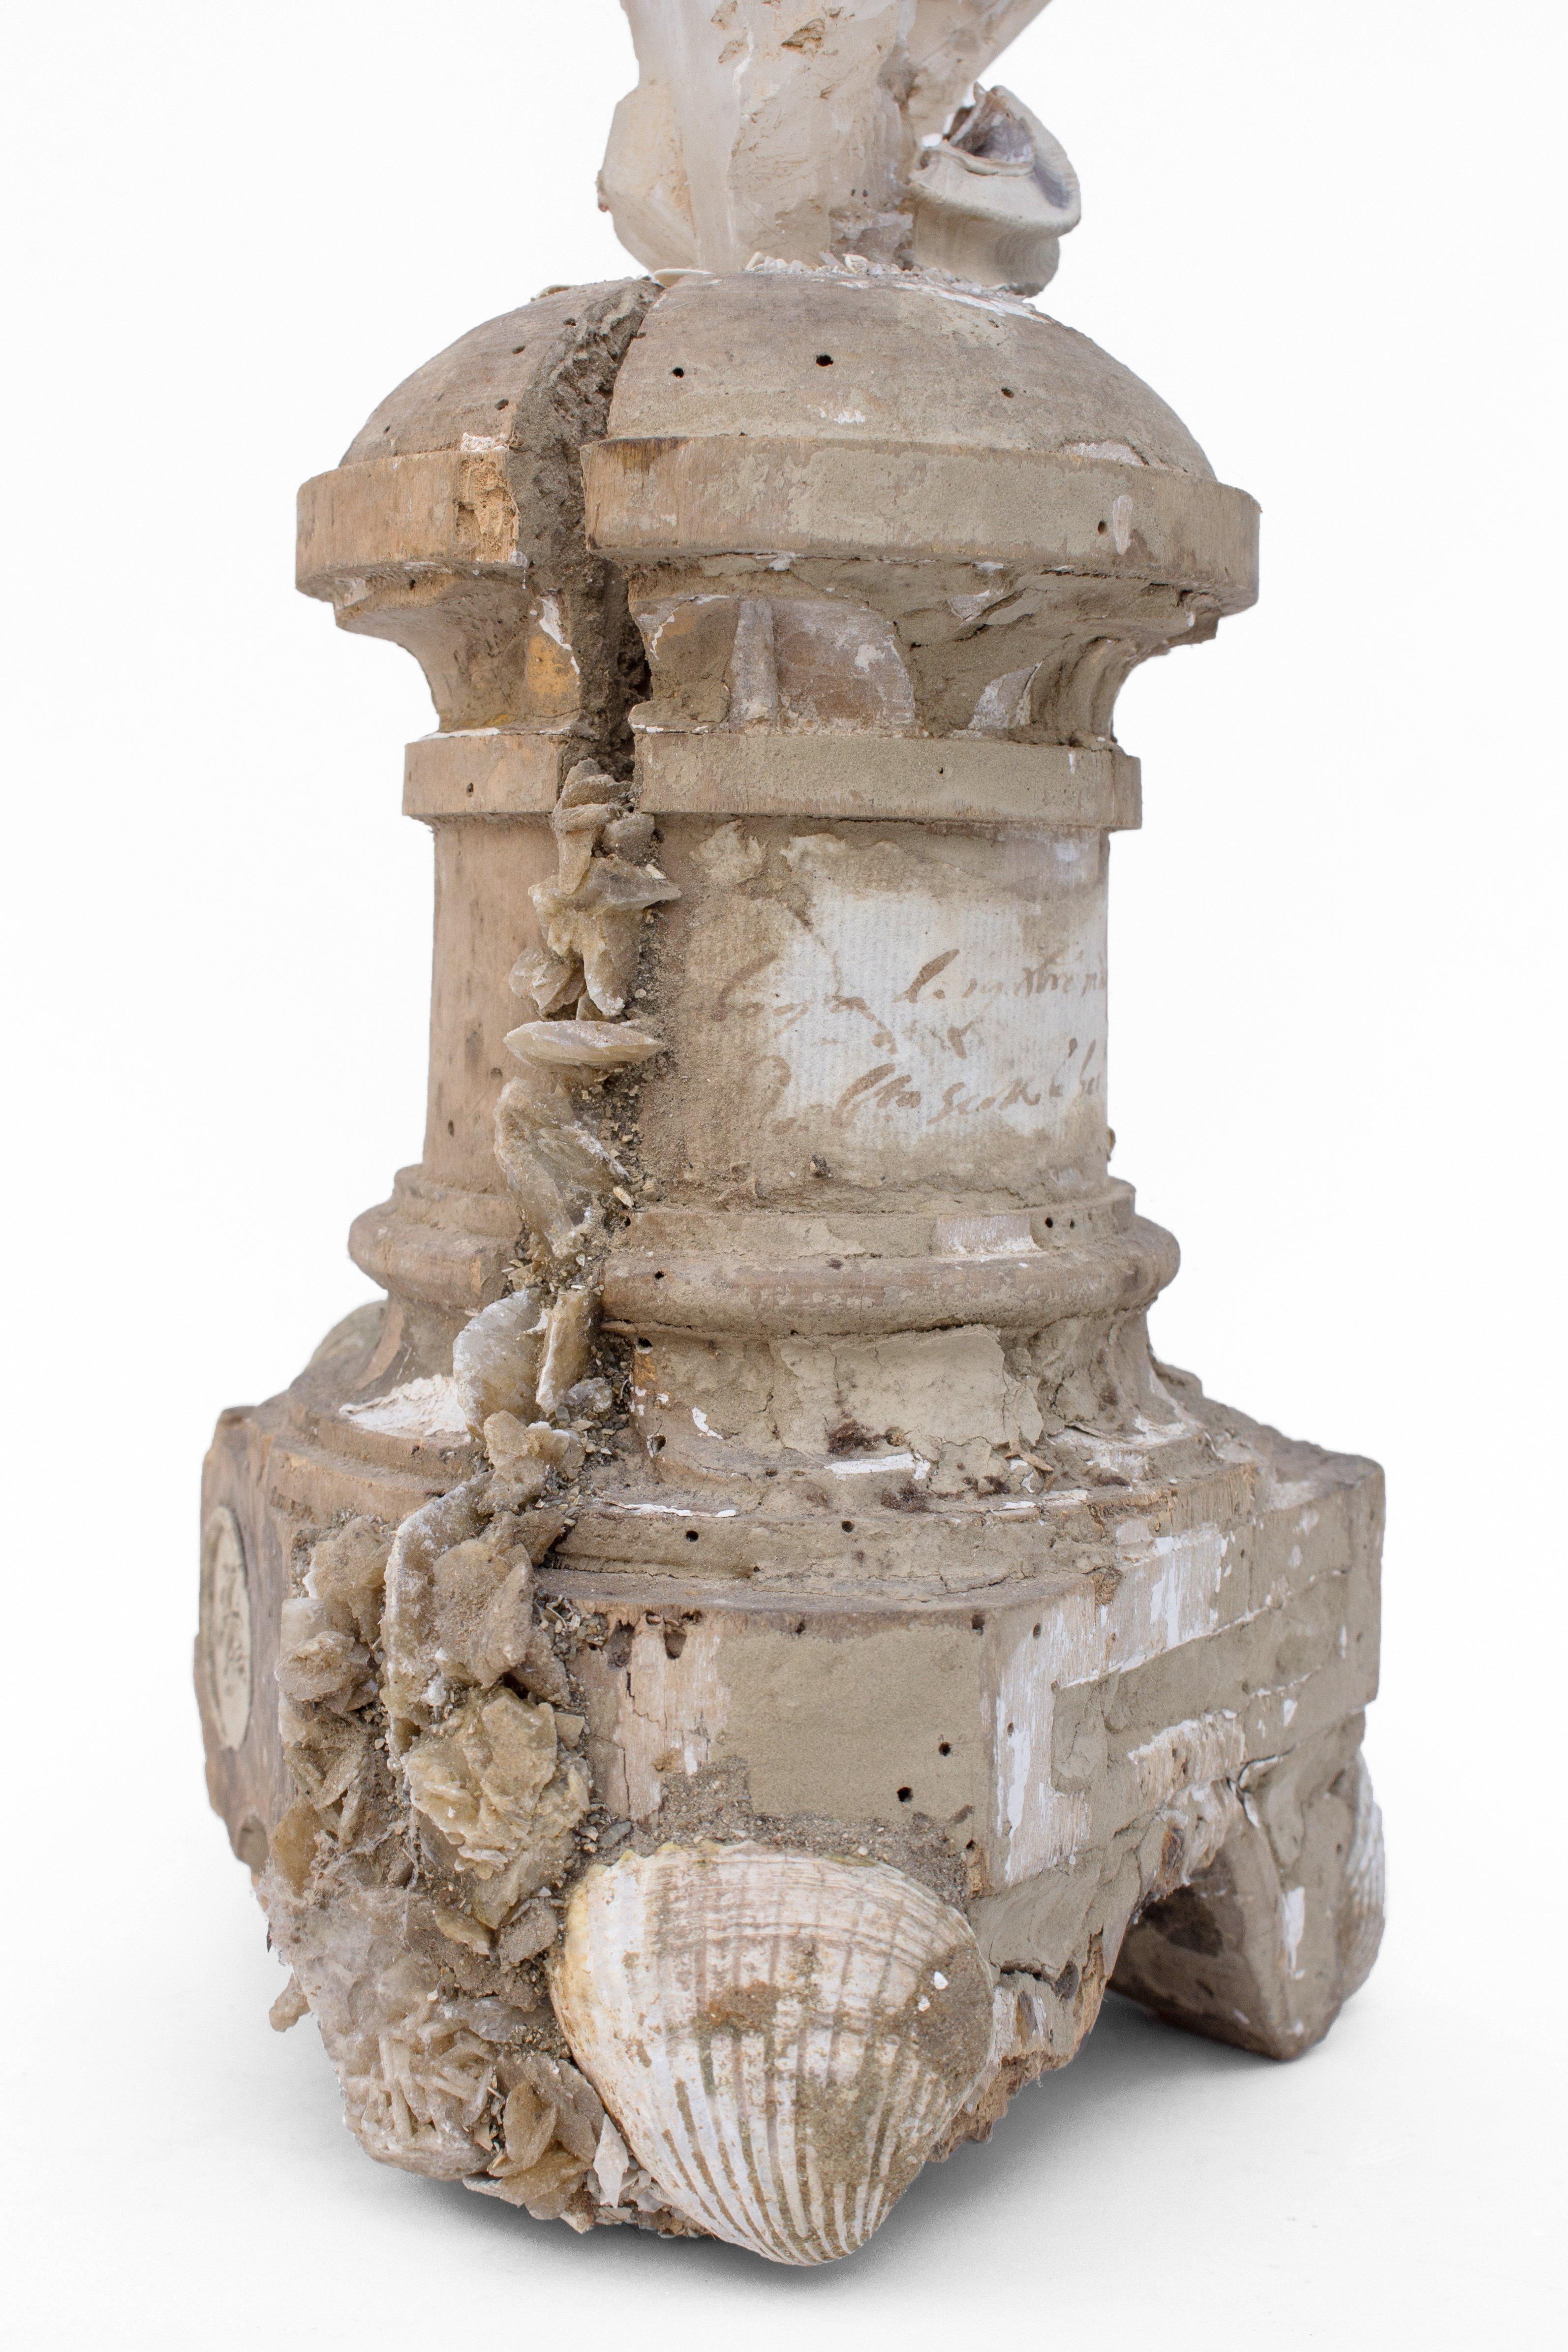 Baroque 17th Century Italian Candlestick with a Selenite Blade Cluster and Fossil Shells